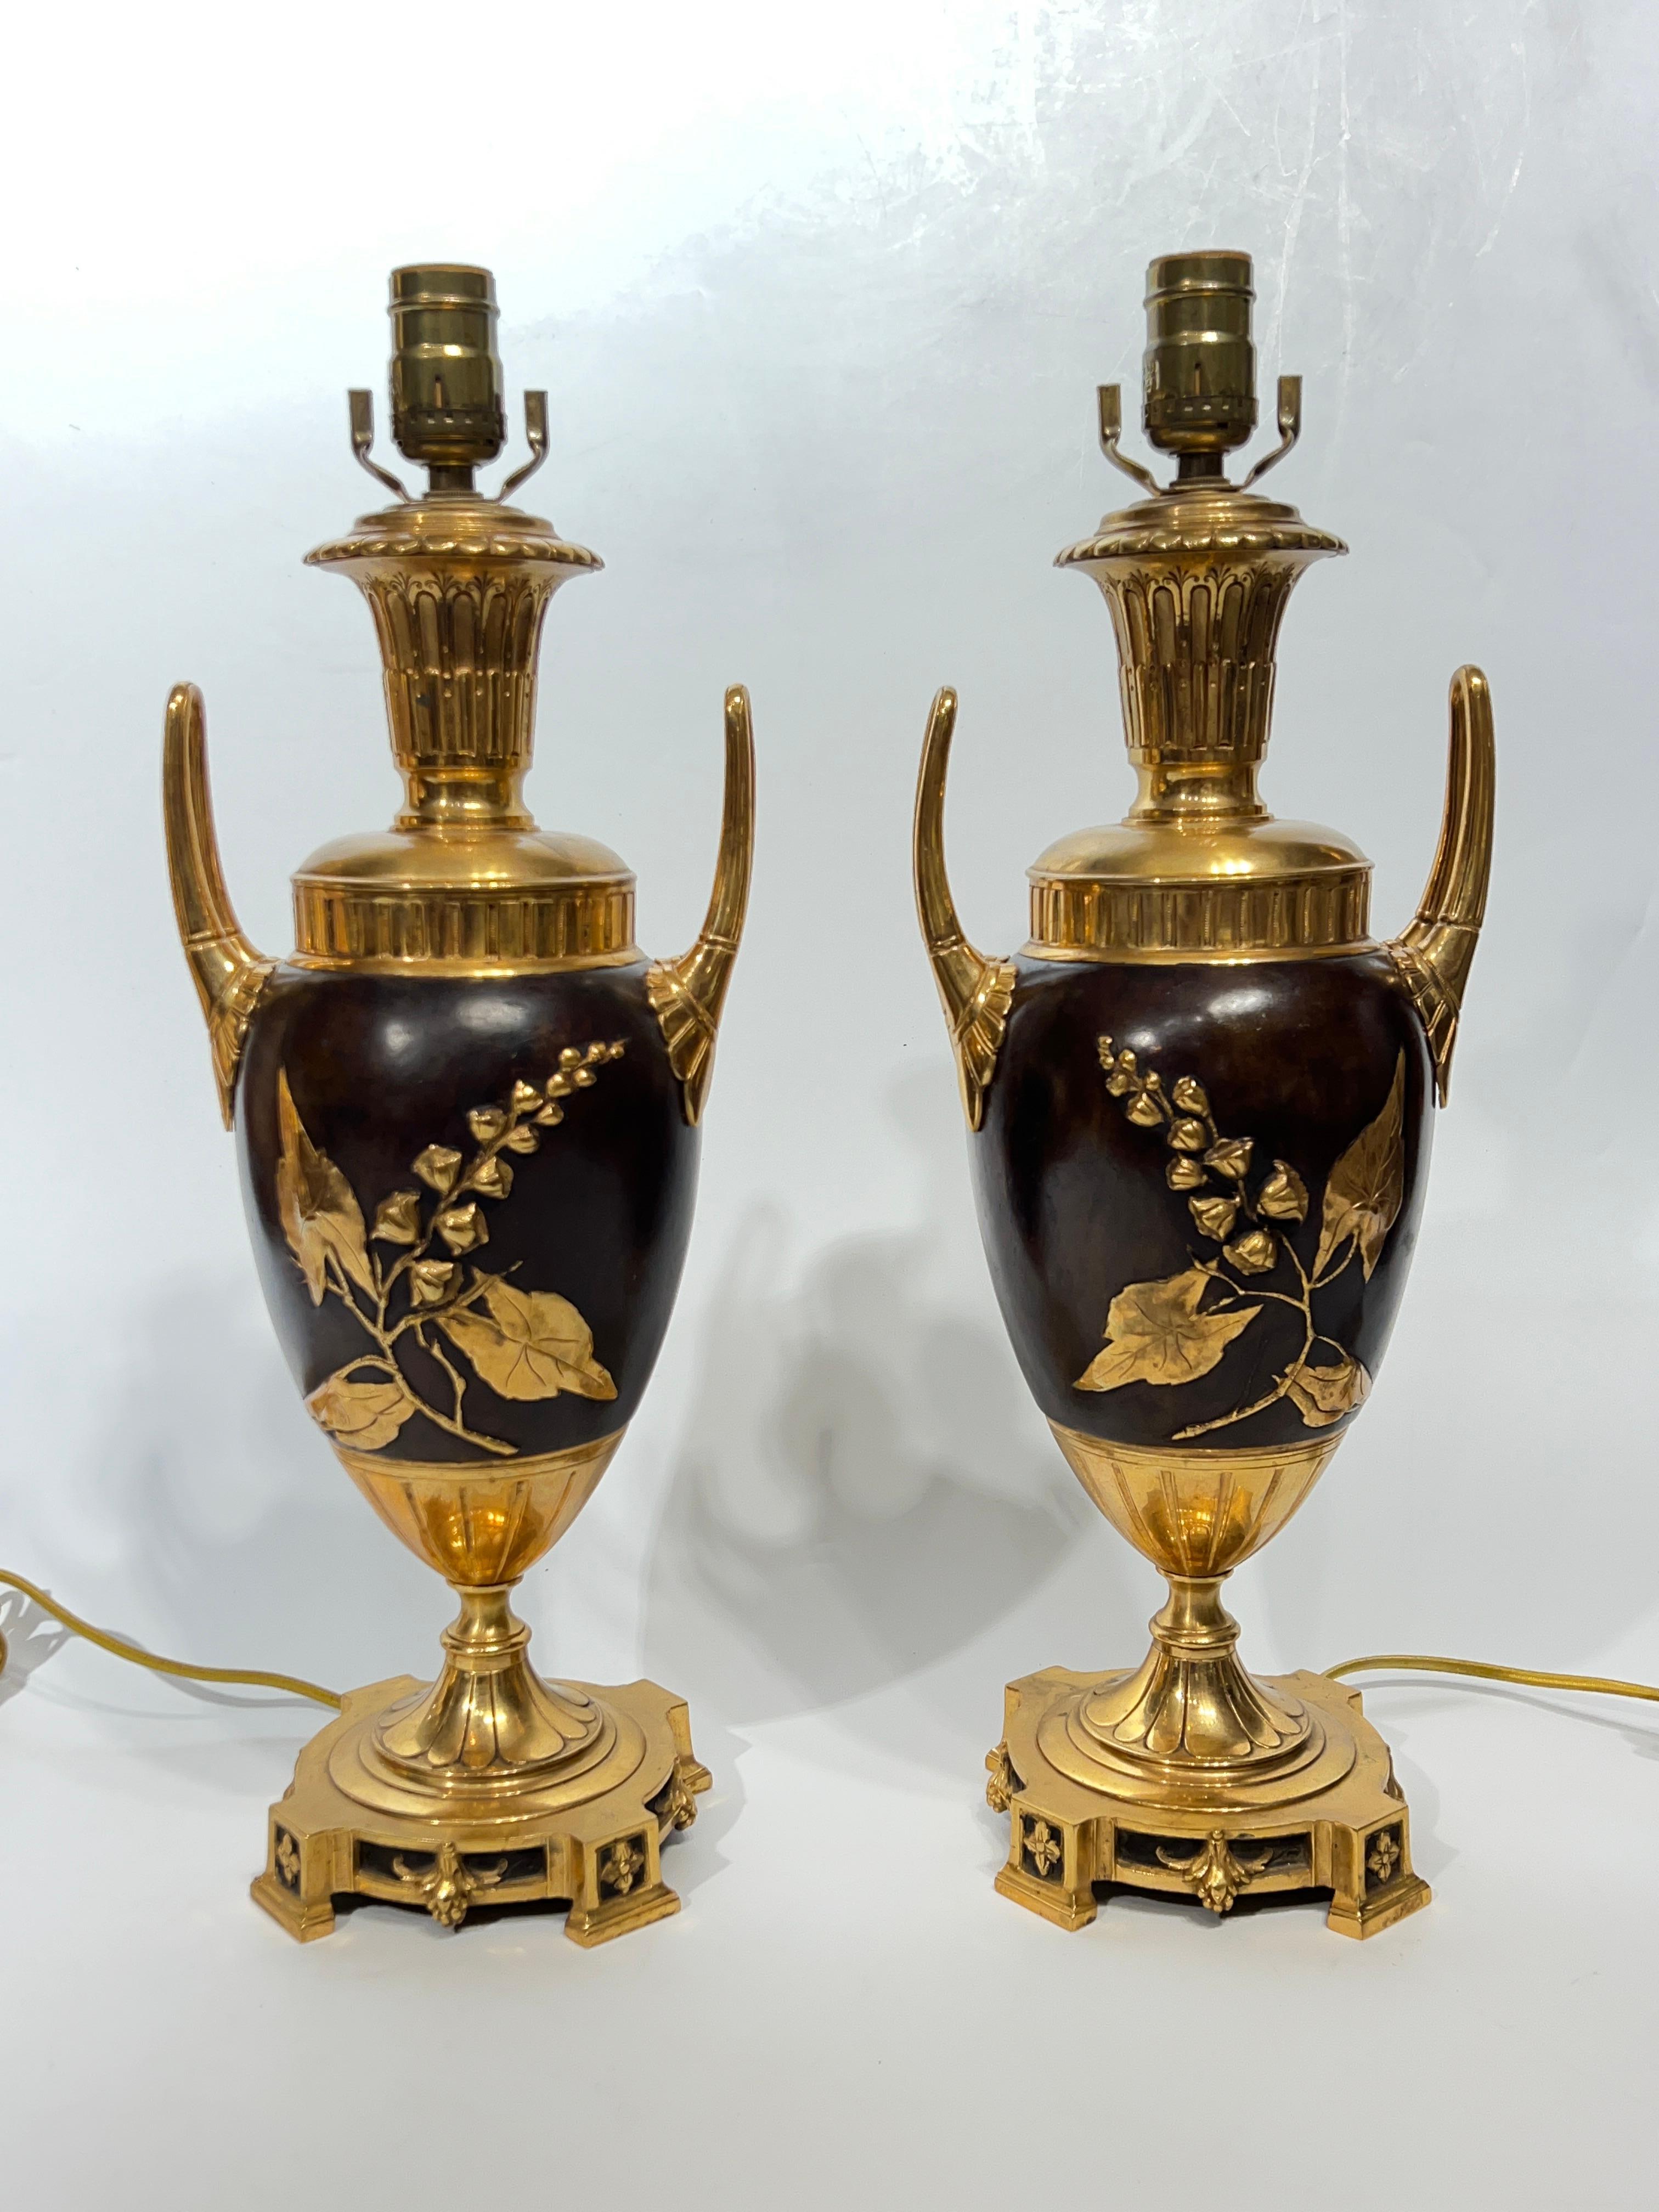 Pair of gilt and patinated and git  bronze table lamps with urn shape with looping handles and raised gilt designs of blooming tree branches.